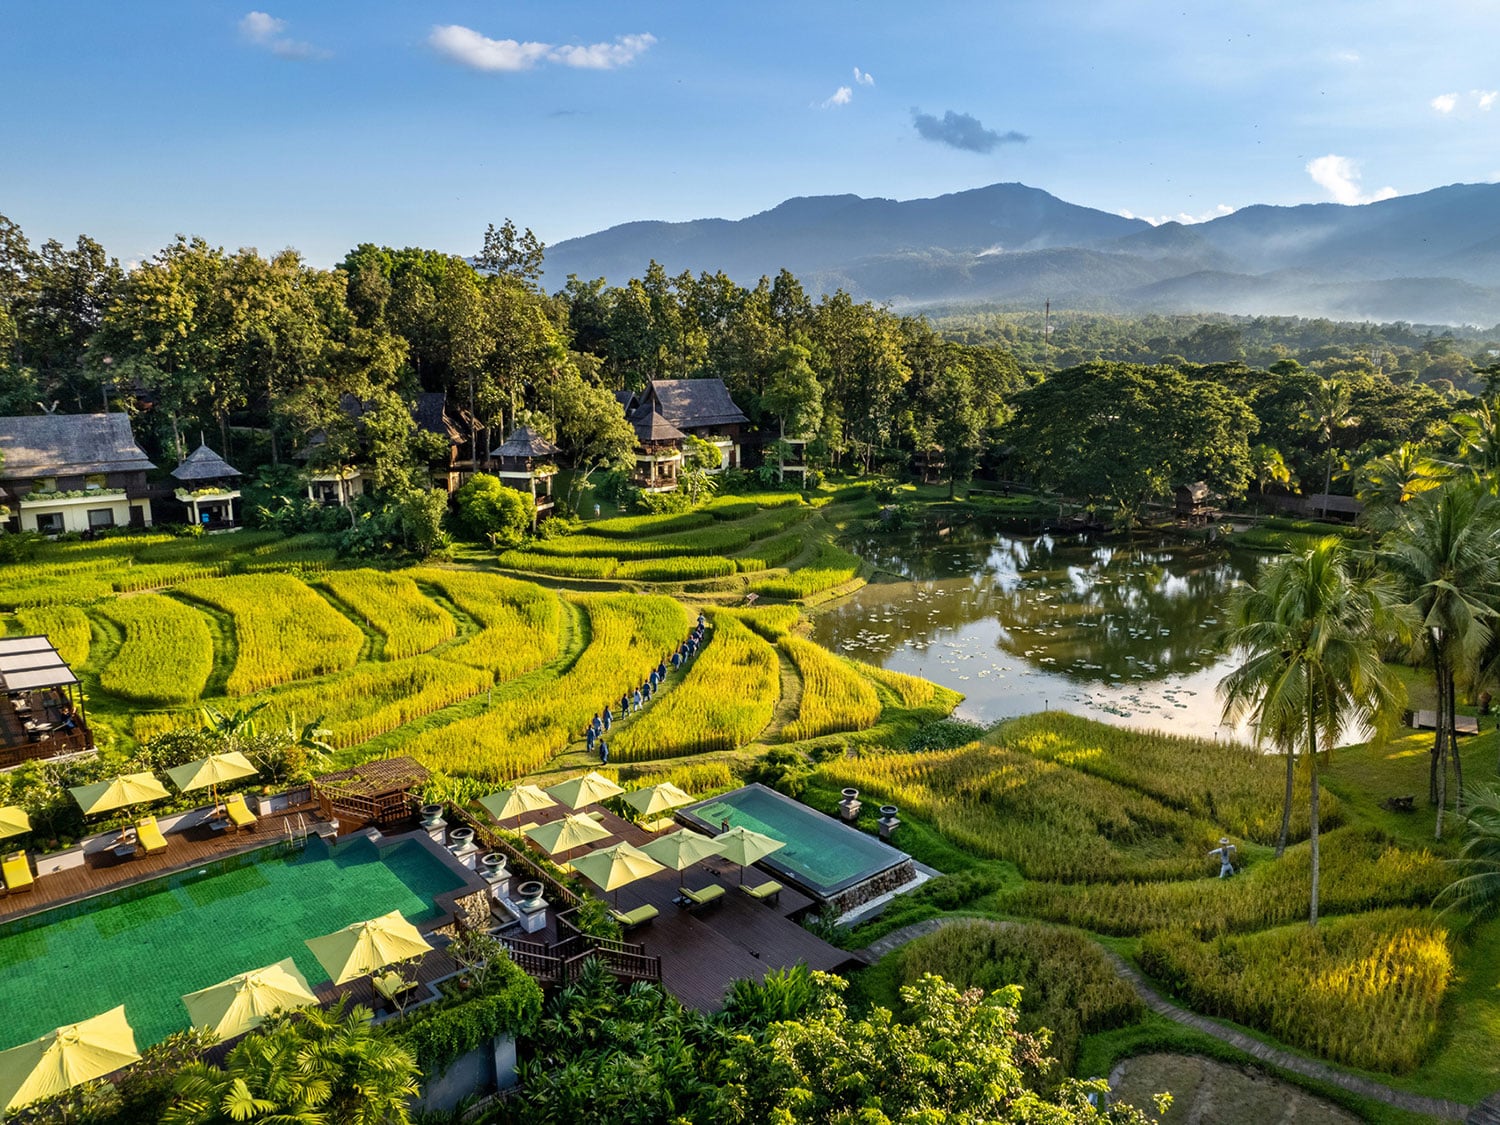 An aerial view of the emerald rice patties at the Four Seasons Resort Chiang Mai in Thailand.